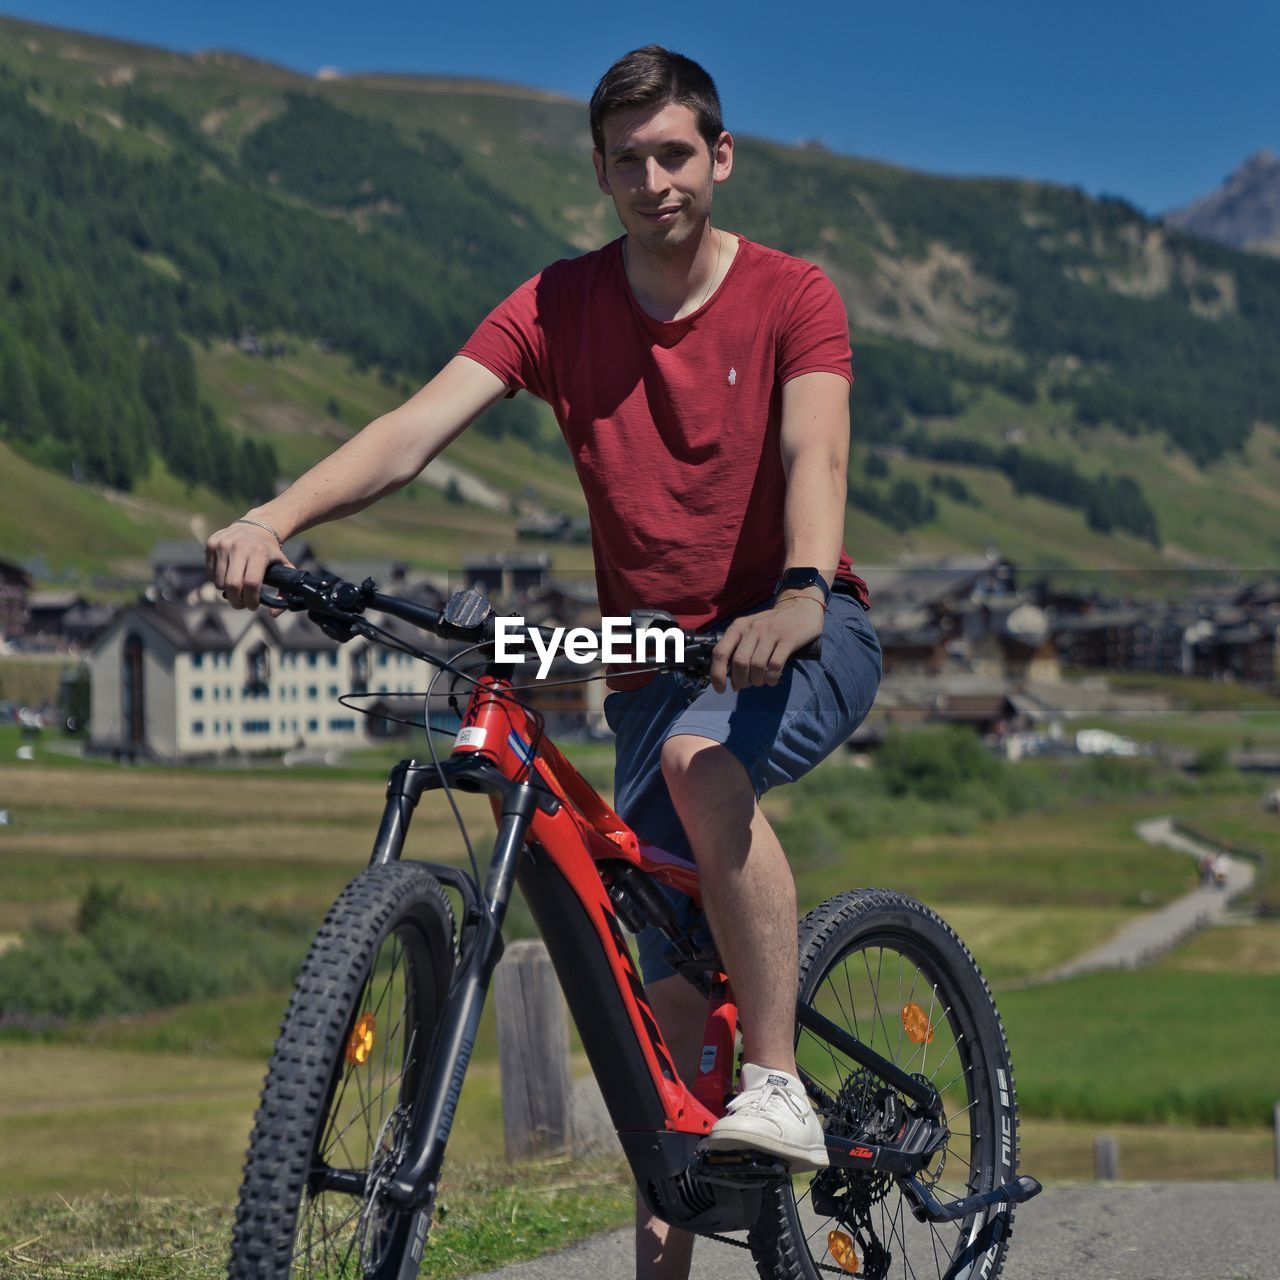 A man riding a bicycle on the street with a mountain backdrop